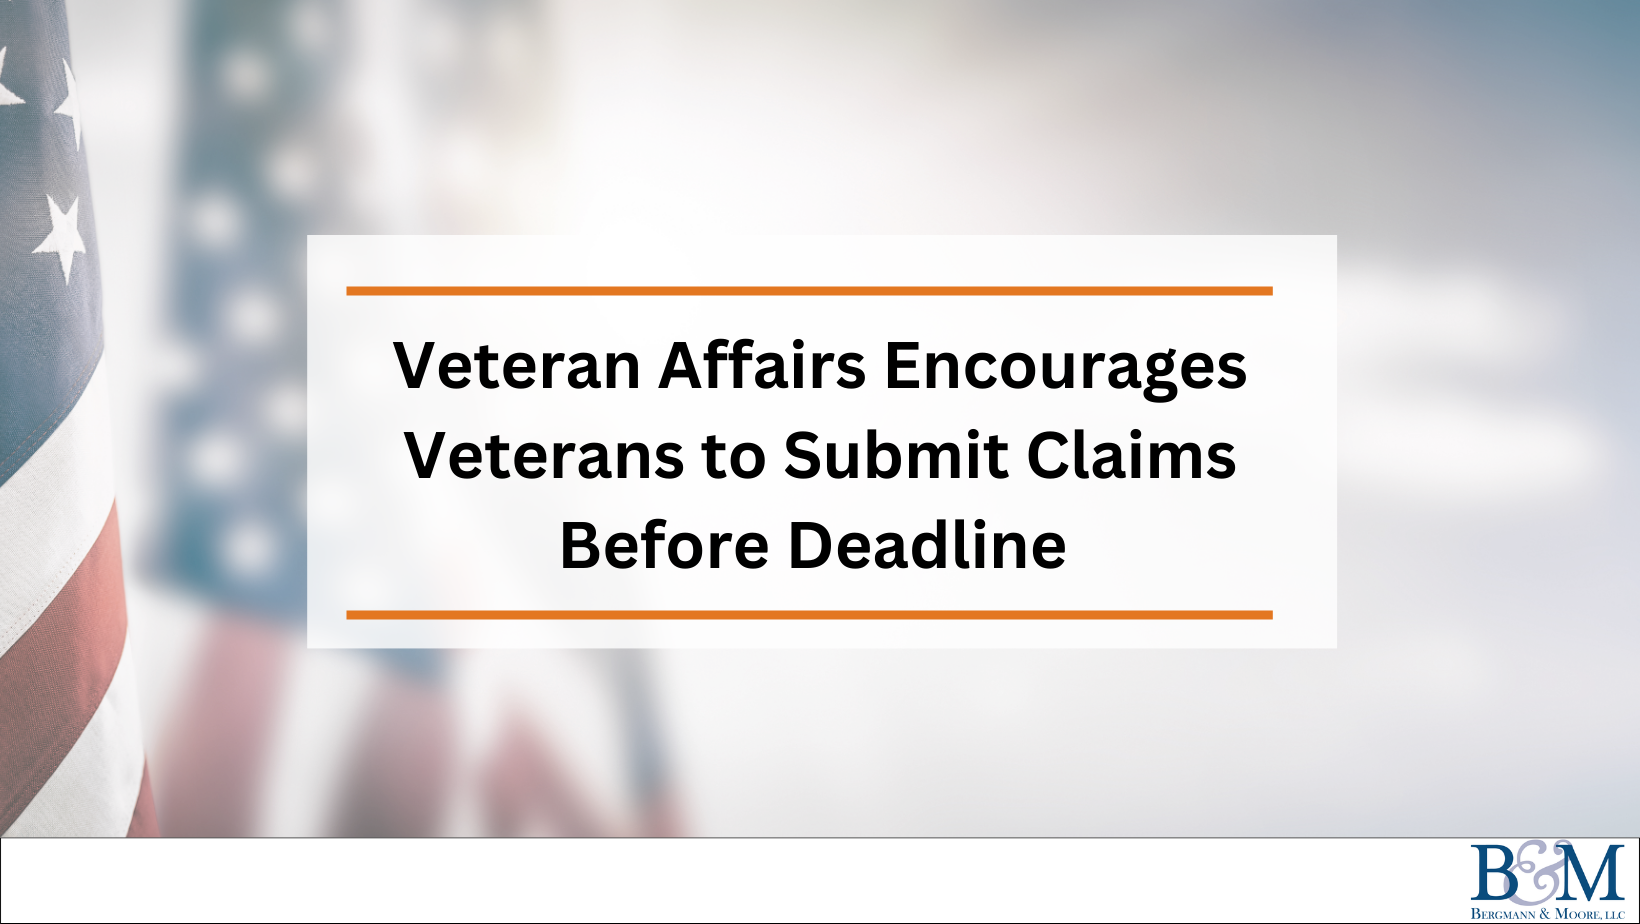 Veteran Affairs Encourages Veterans to Submit Claims Before Deadline